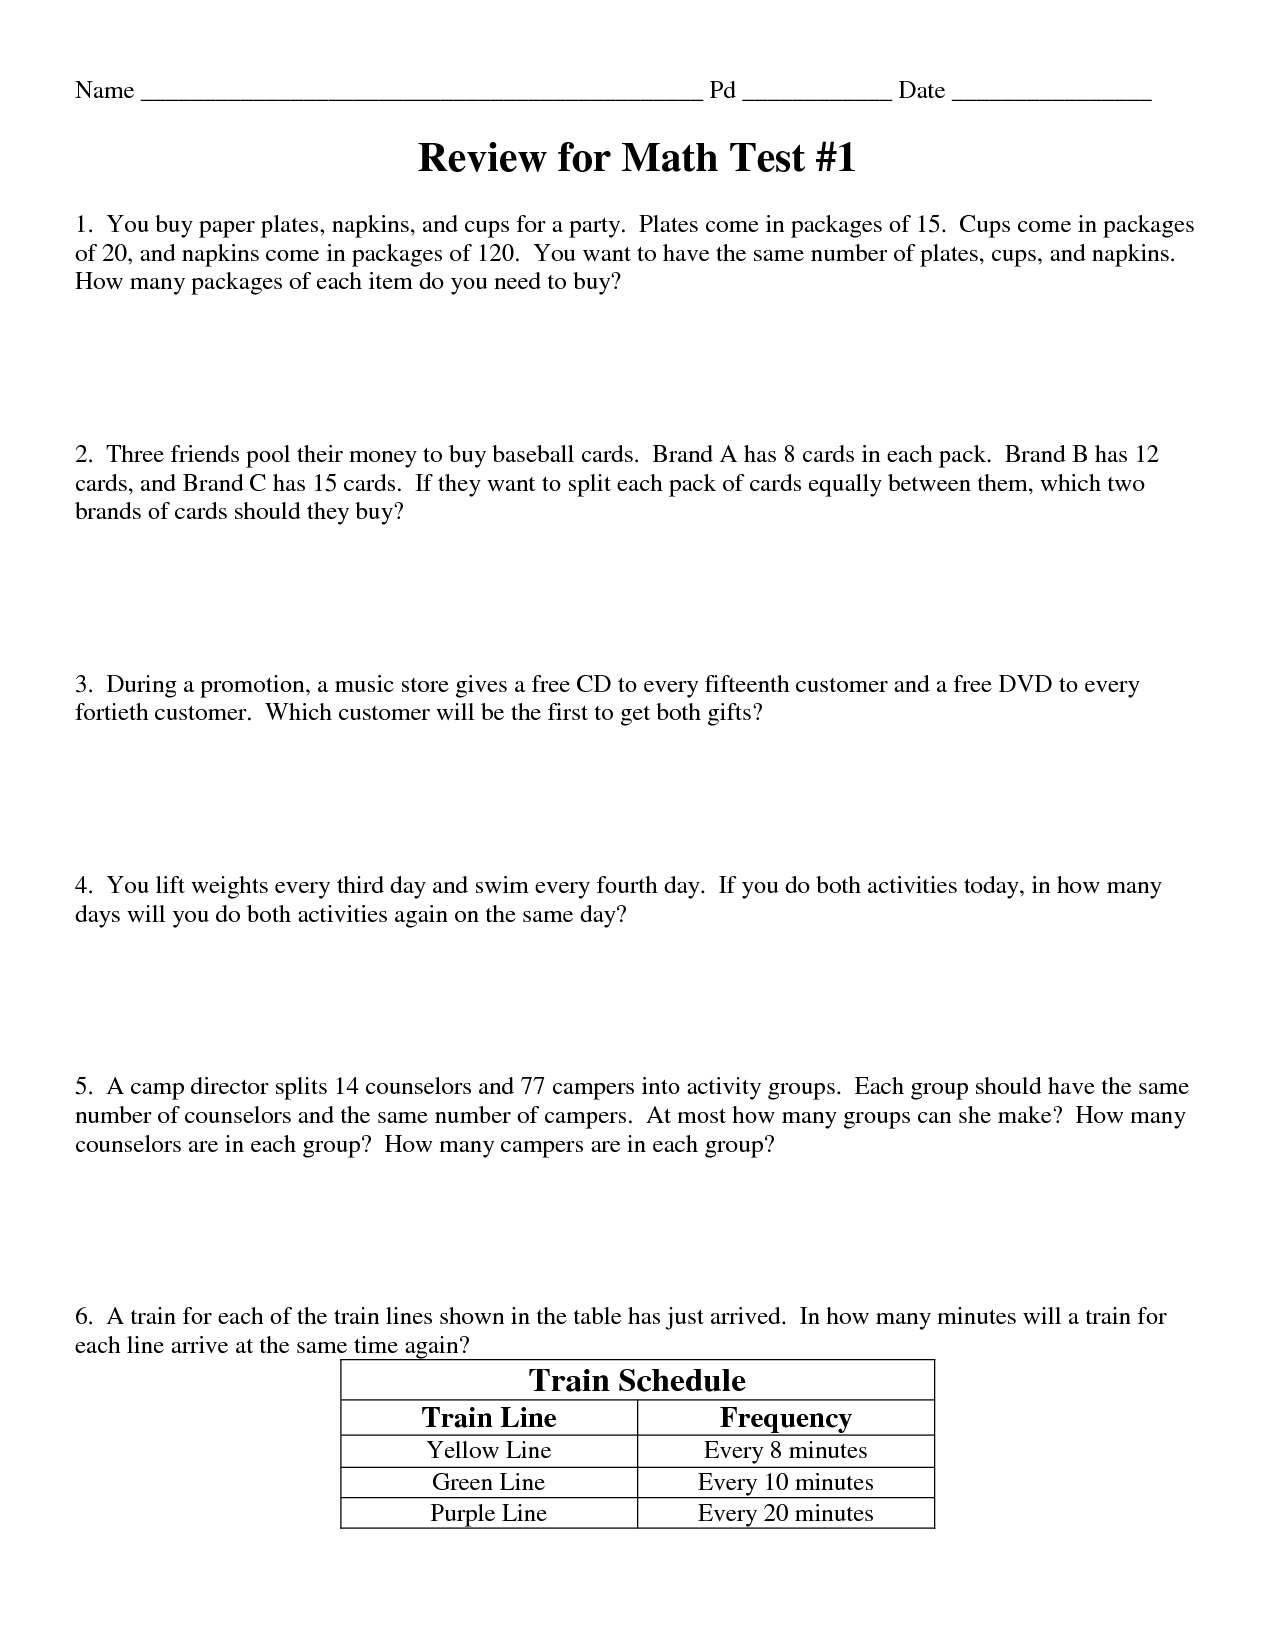 Greatest Common Factor And Least Common Multiple Word Problems Worksheet